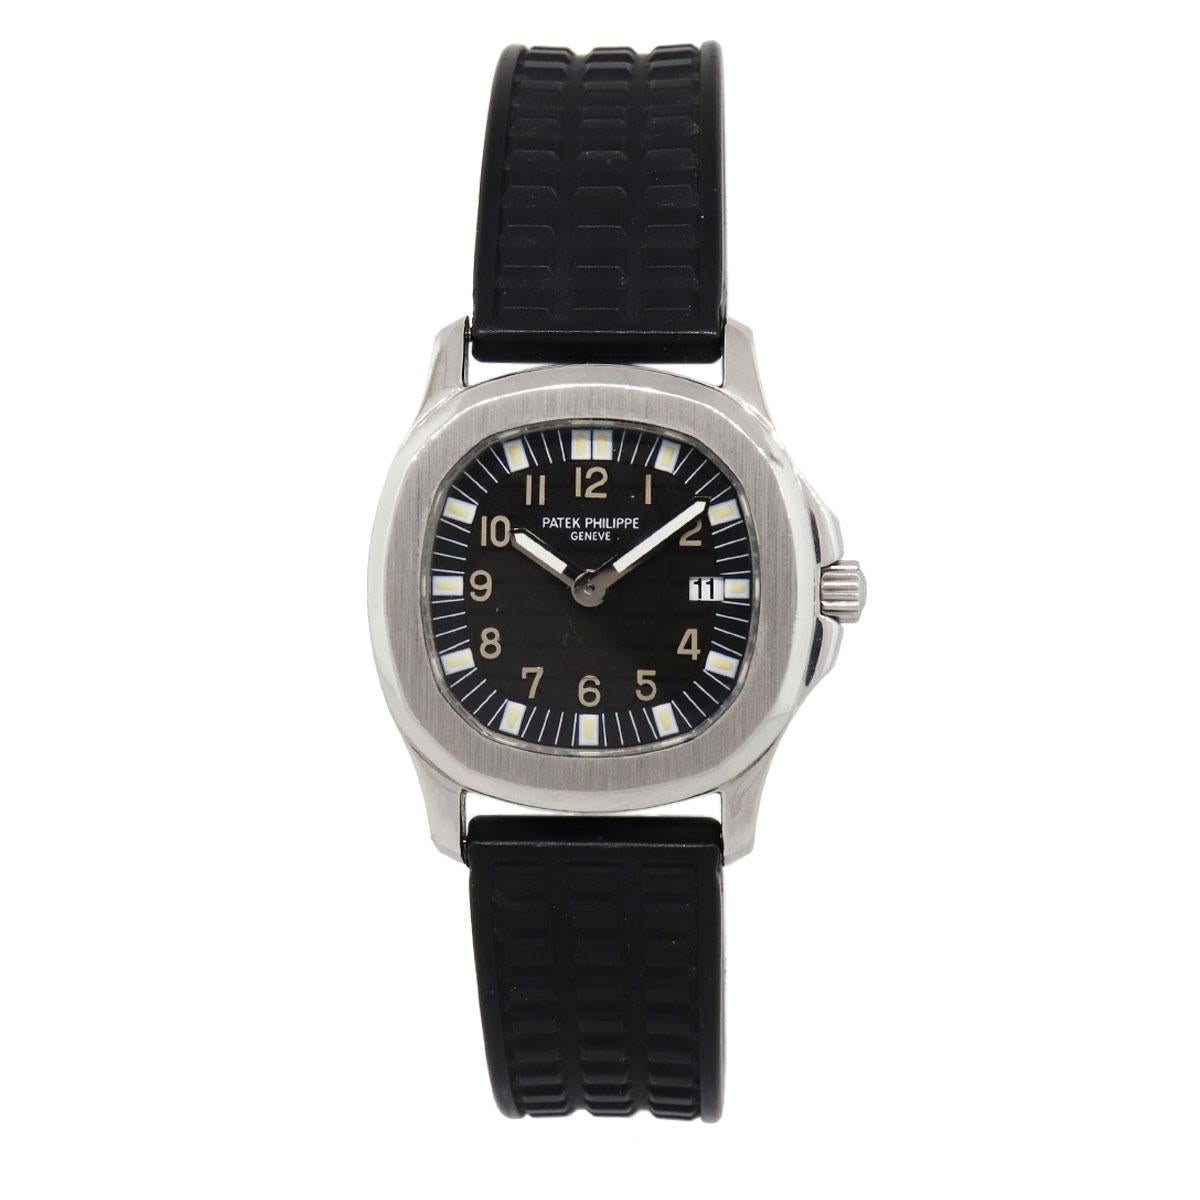 Brand: Patek Philippe
MPN: 4960
Model: Aquanaut
Case Material: Stainless steel
Case Diameter: 30mm
Crystal: Sapphire crystal
Bezel: Stainless steel
Dial: Black dial
Bracelet: Rubber strap (factory)
Size: Will fit a 5.50″ wrist
Clasp: Deployment